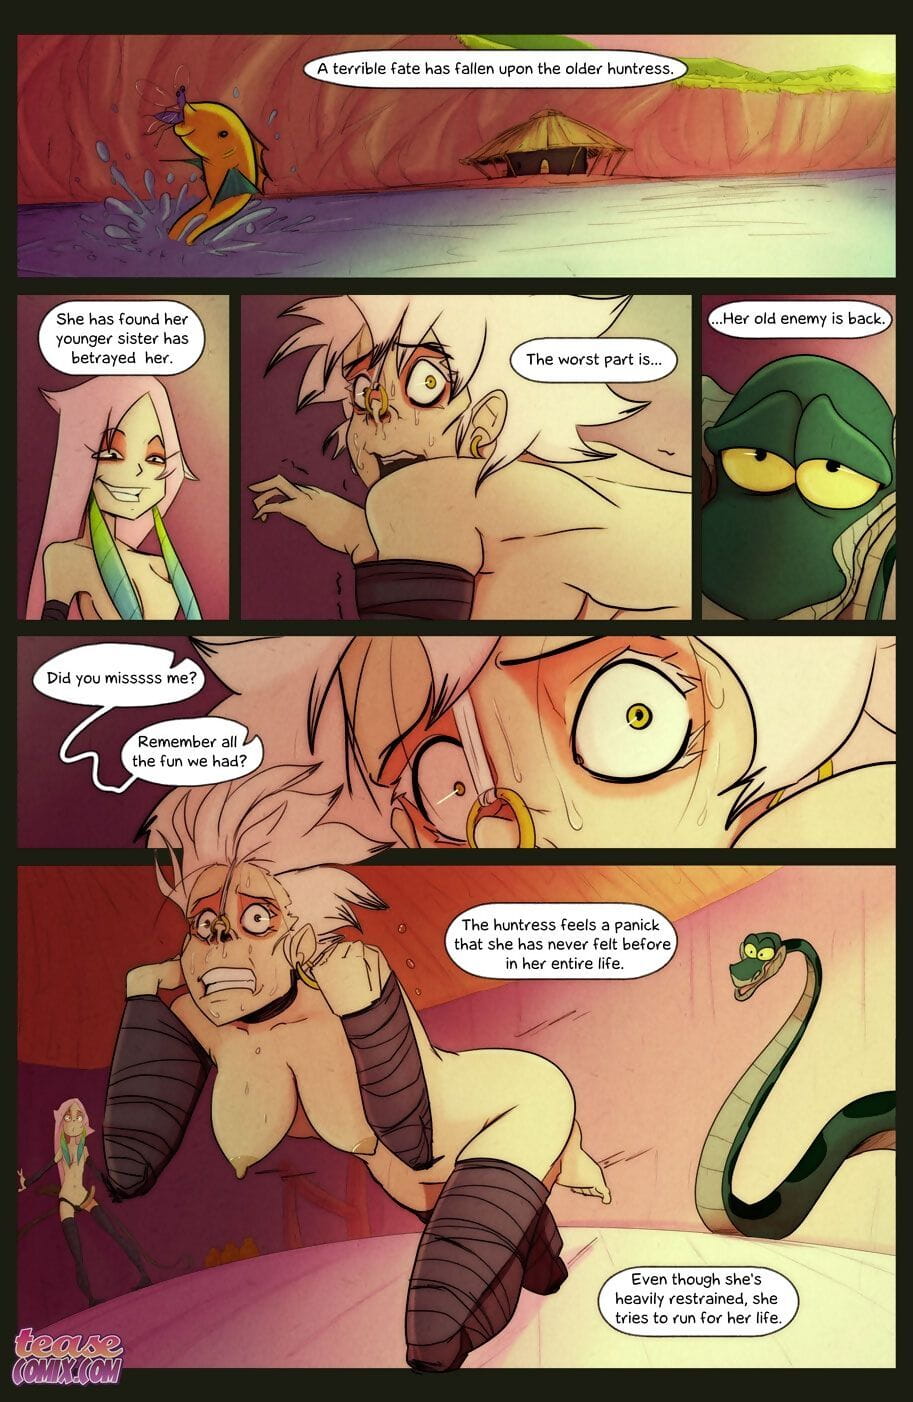 Of the Snake and the Girl - part 5